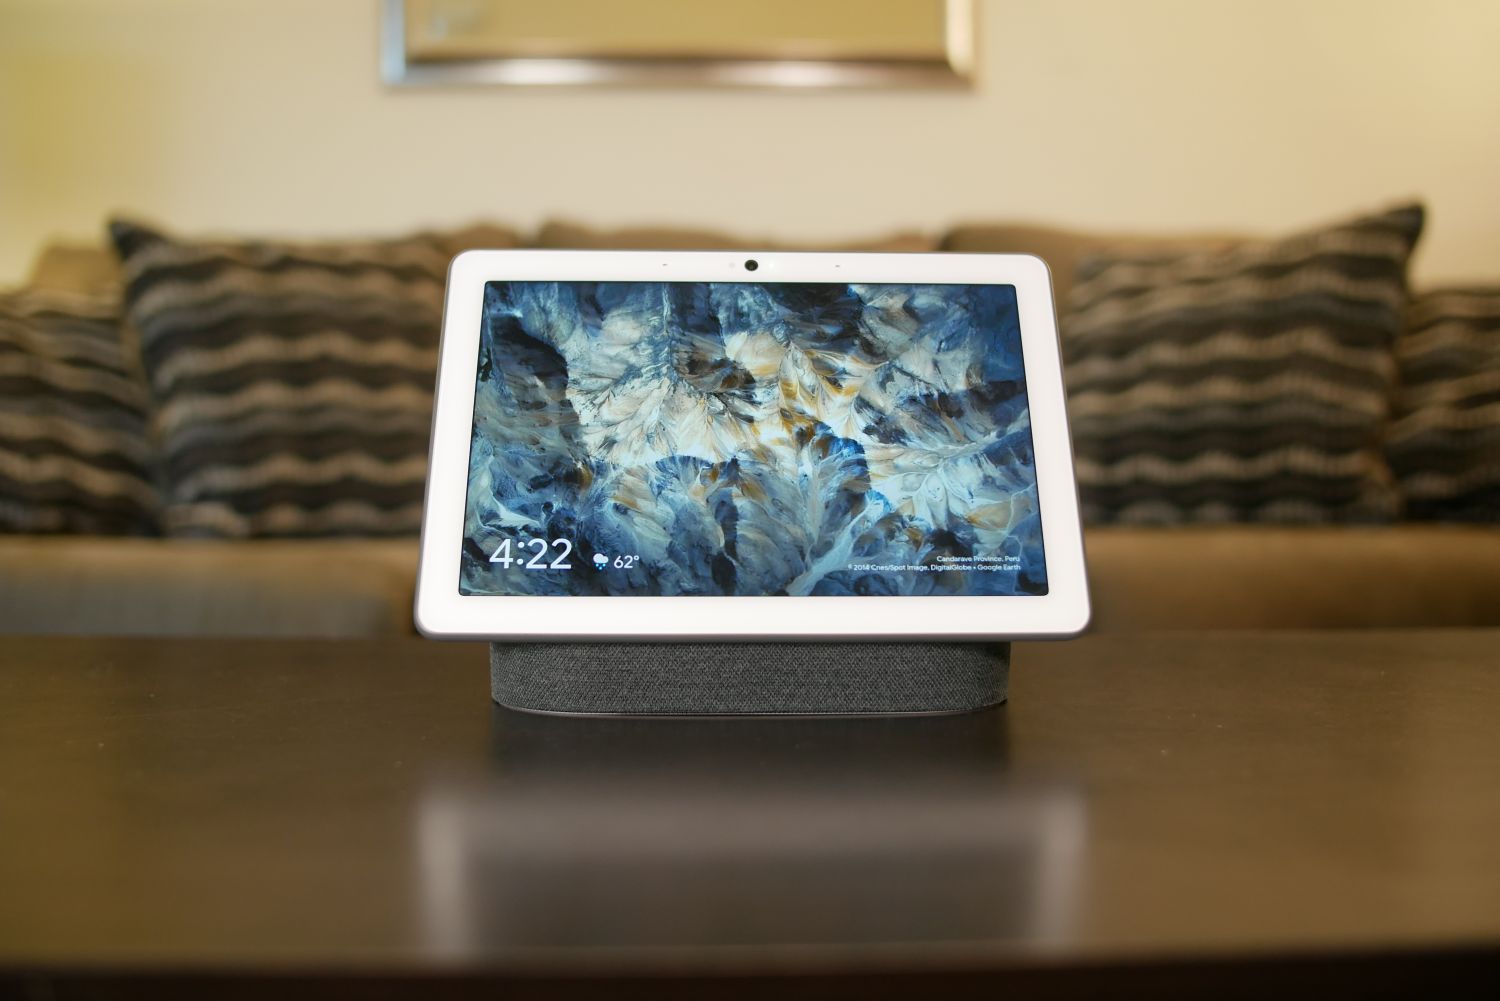 Google Nest Hub Max Review: Large Display, Excellent Speakers